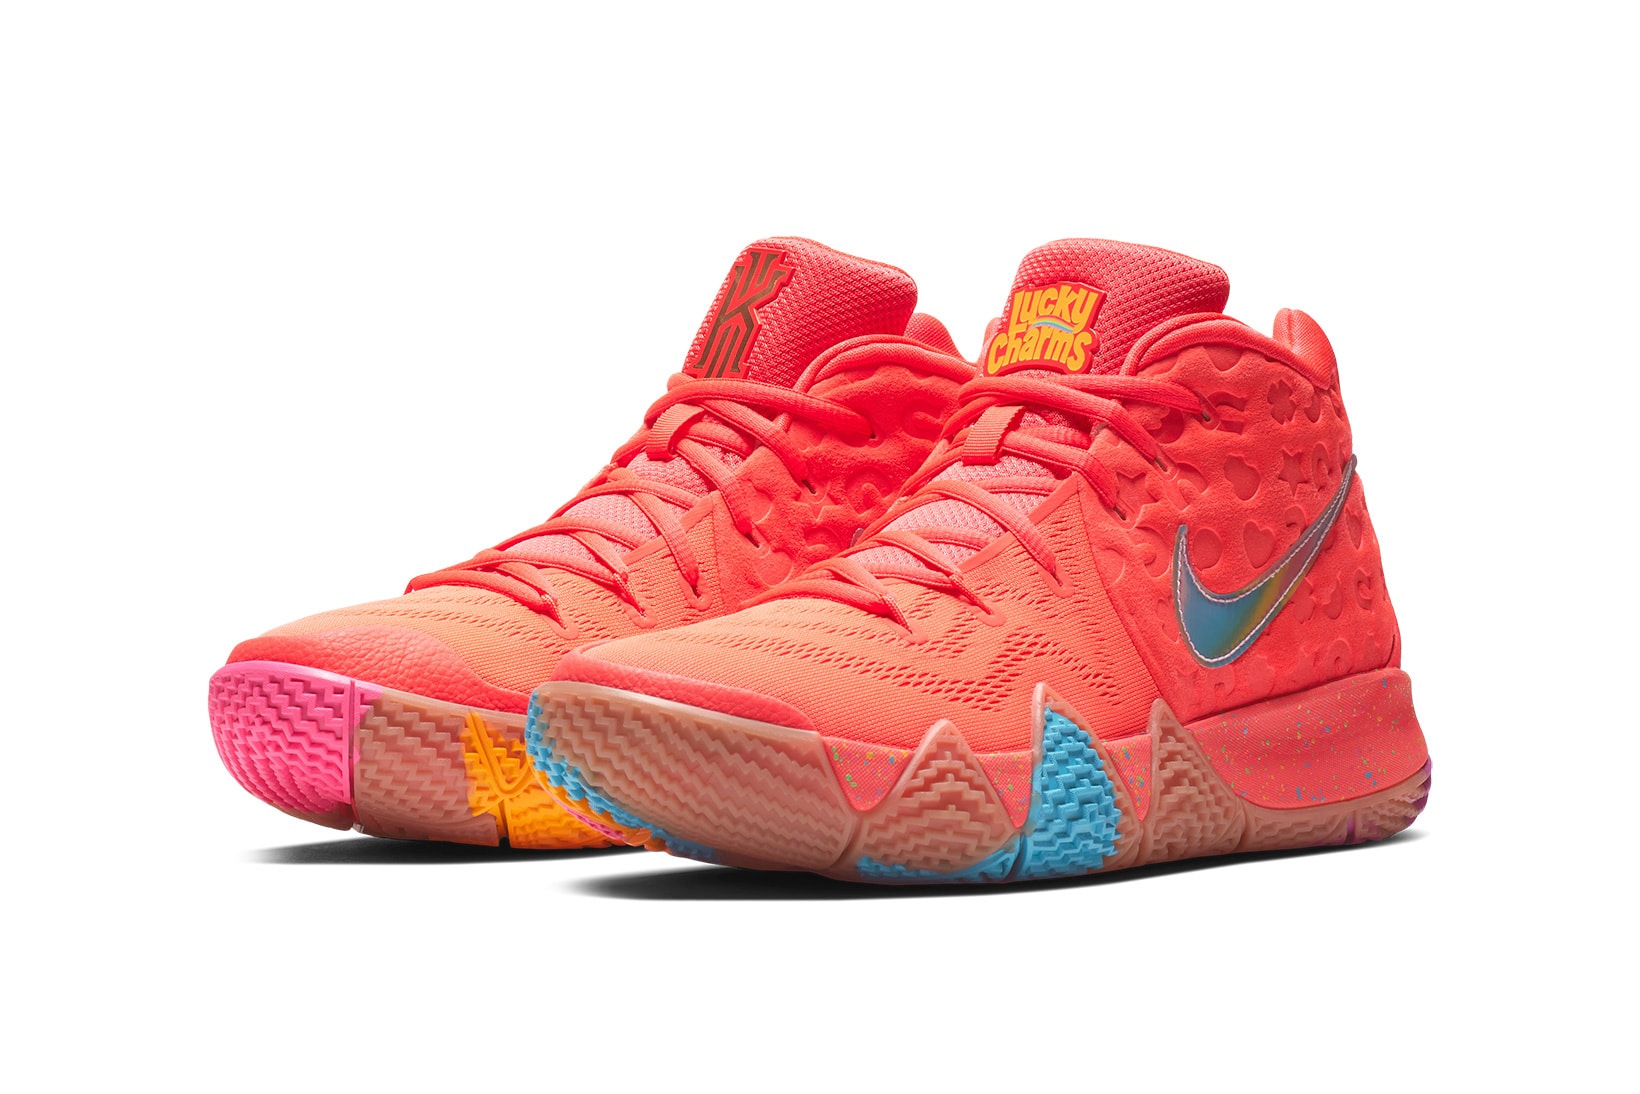 Nike Kyrie 4 Kix (Special Cereal Box Package)  Packaging design, Cereal  boxes packaging, Nike